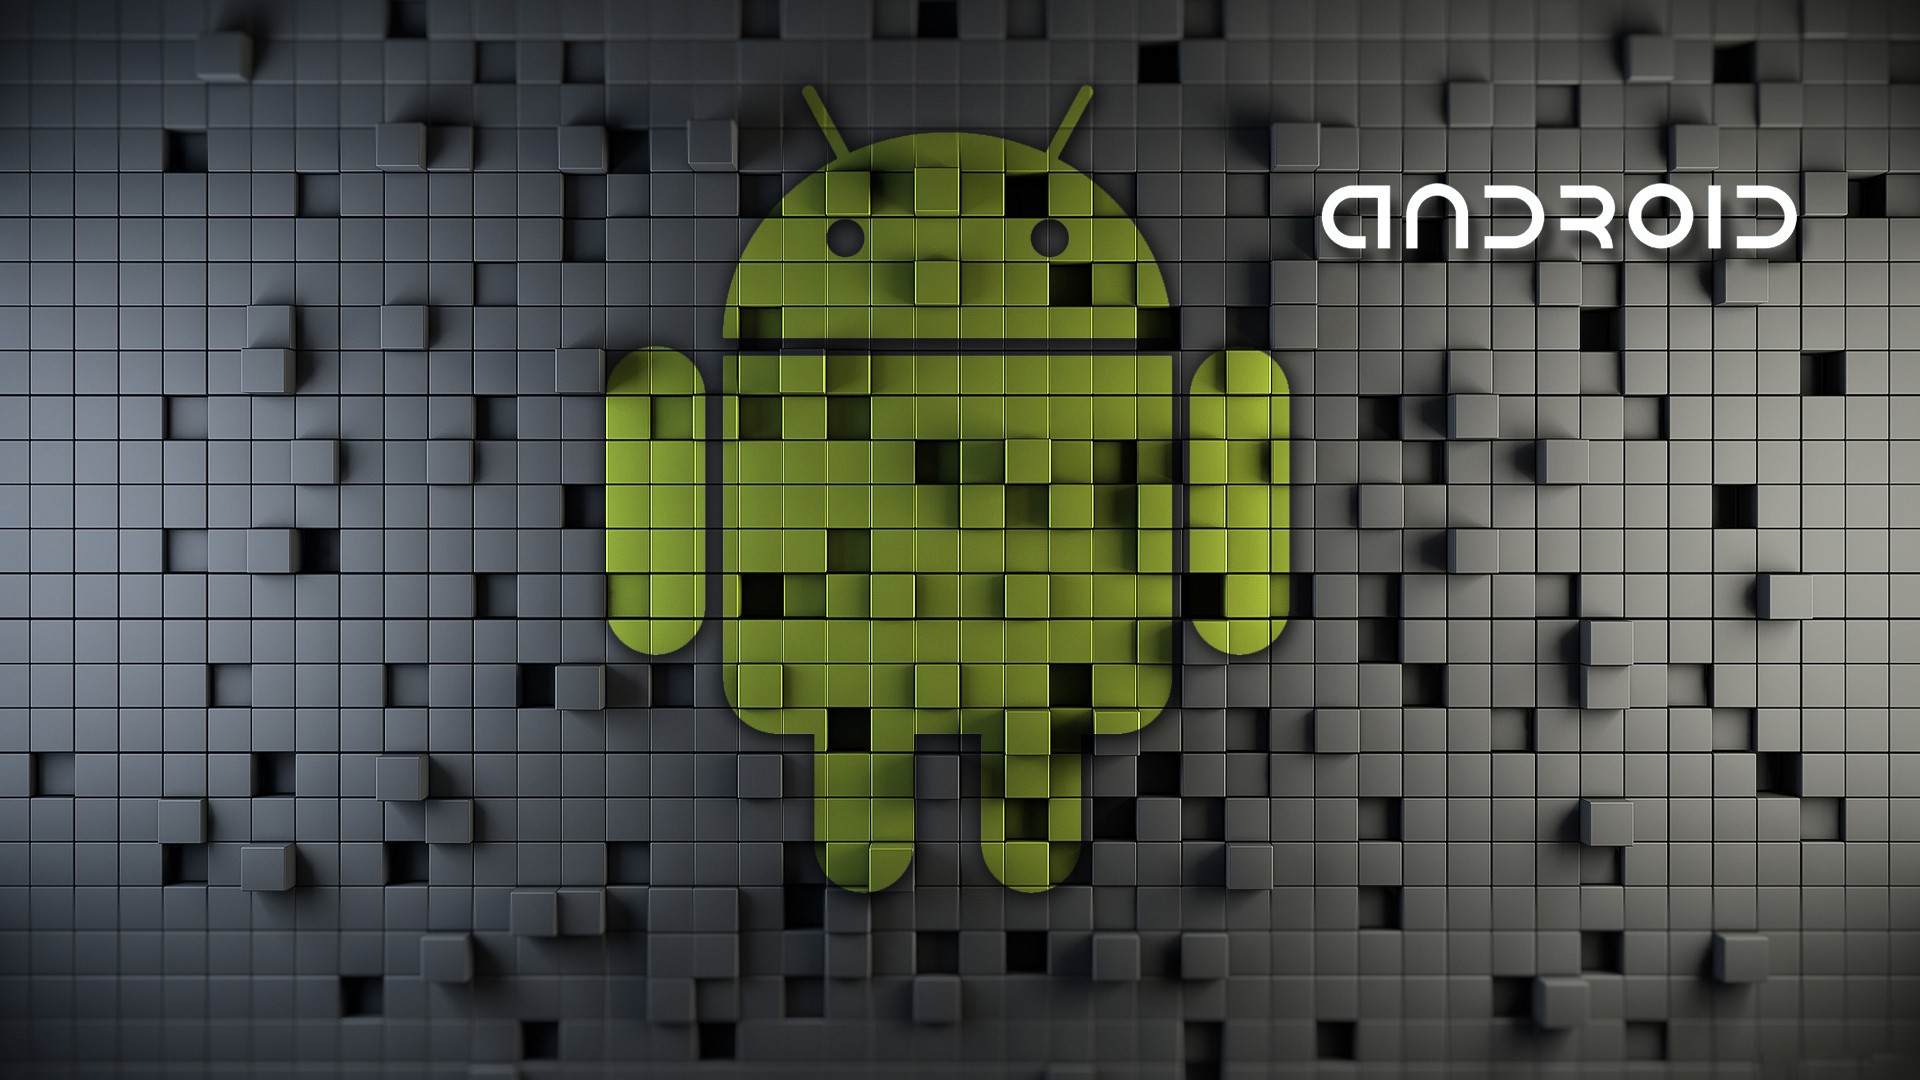 android logo texture free awesome image for mobile